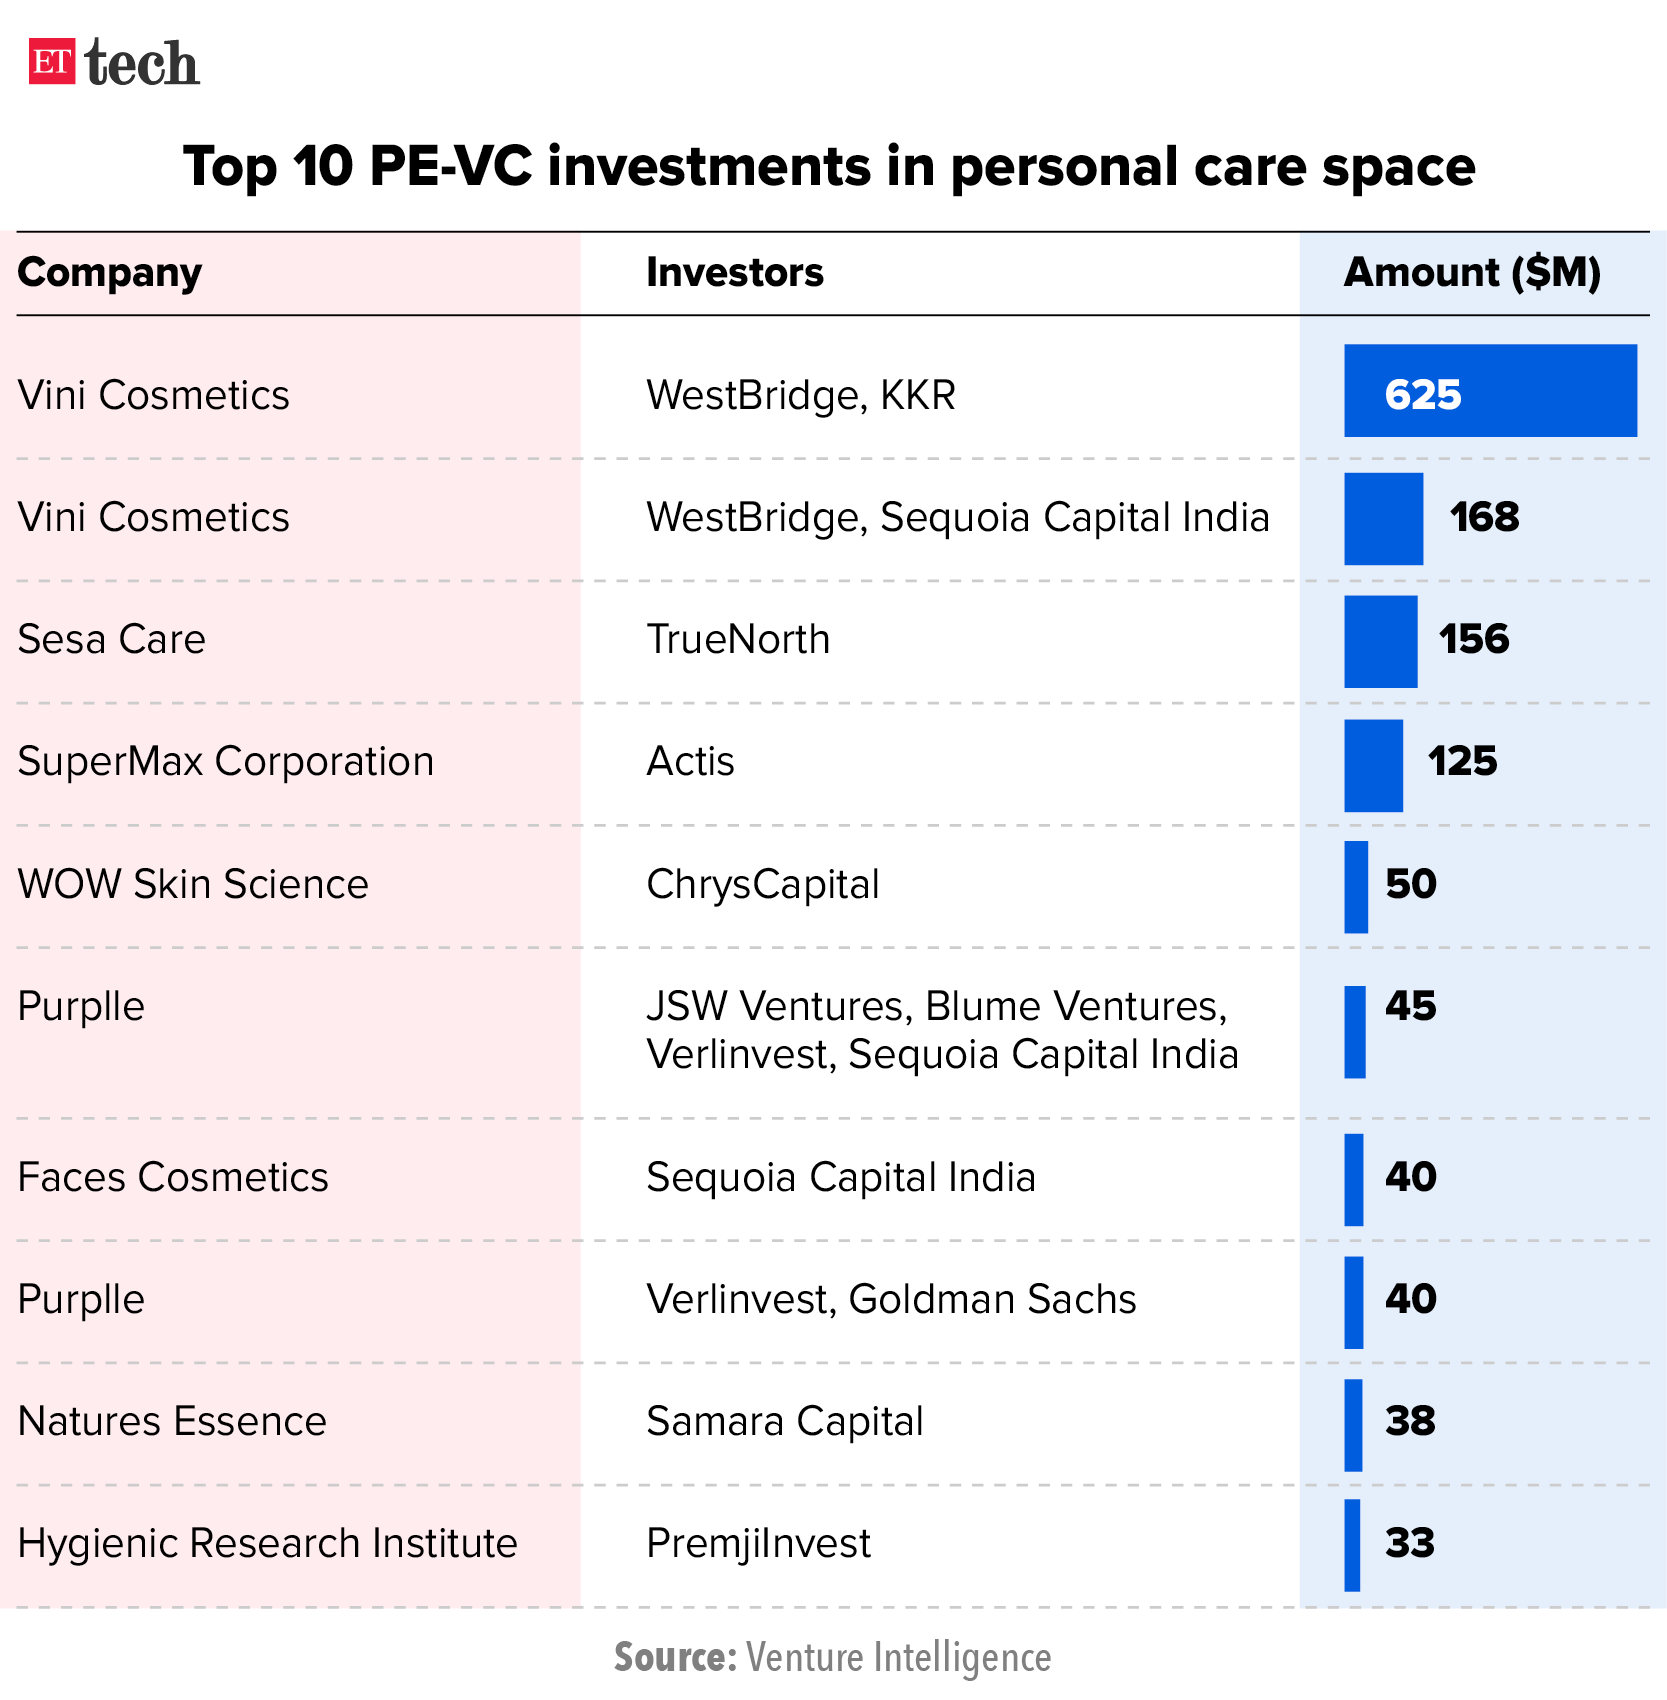 Top 10 PE-VC investments in personal care space